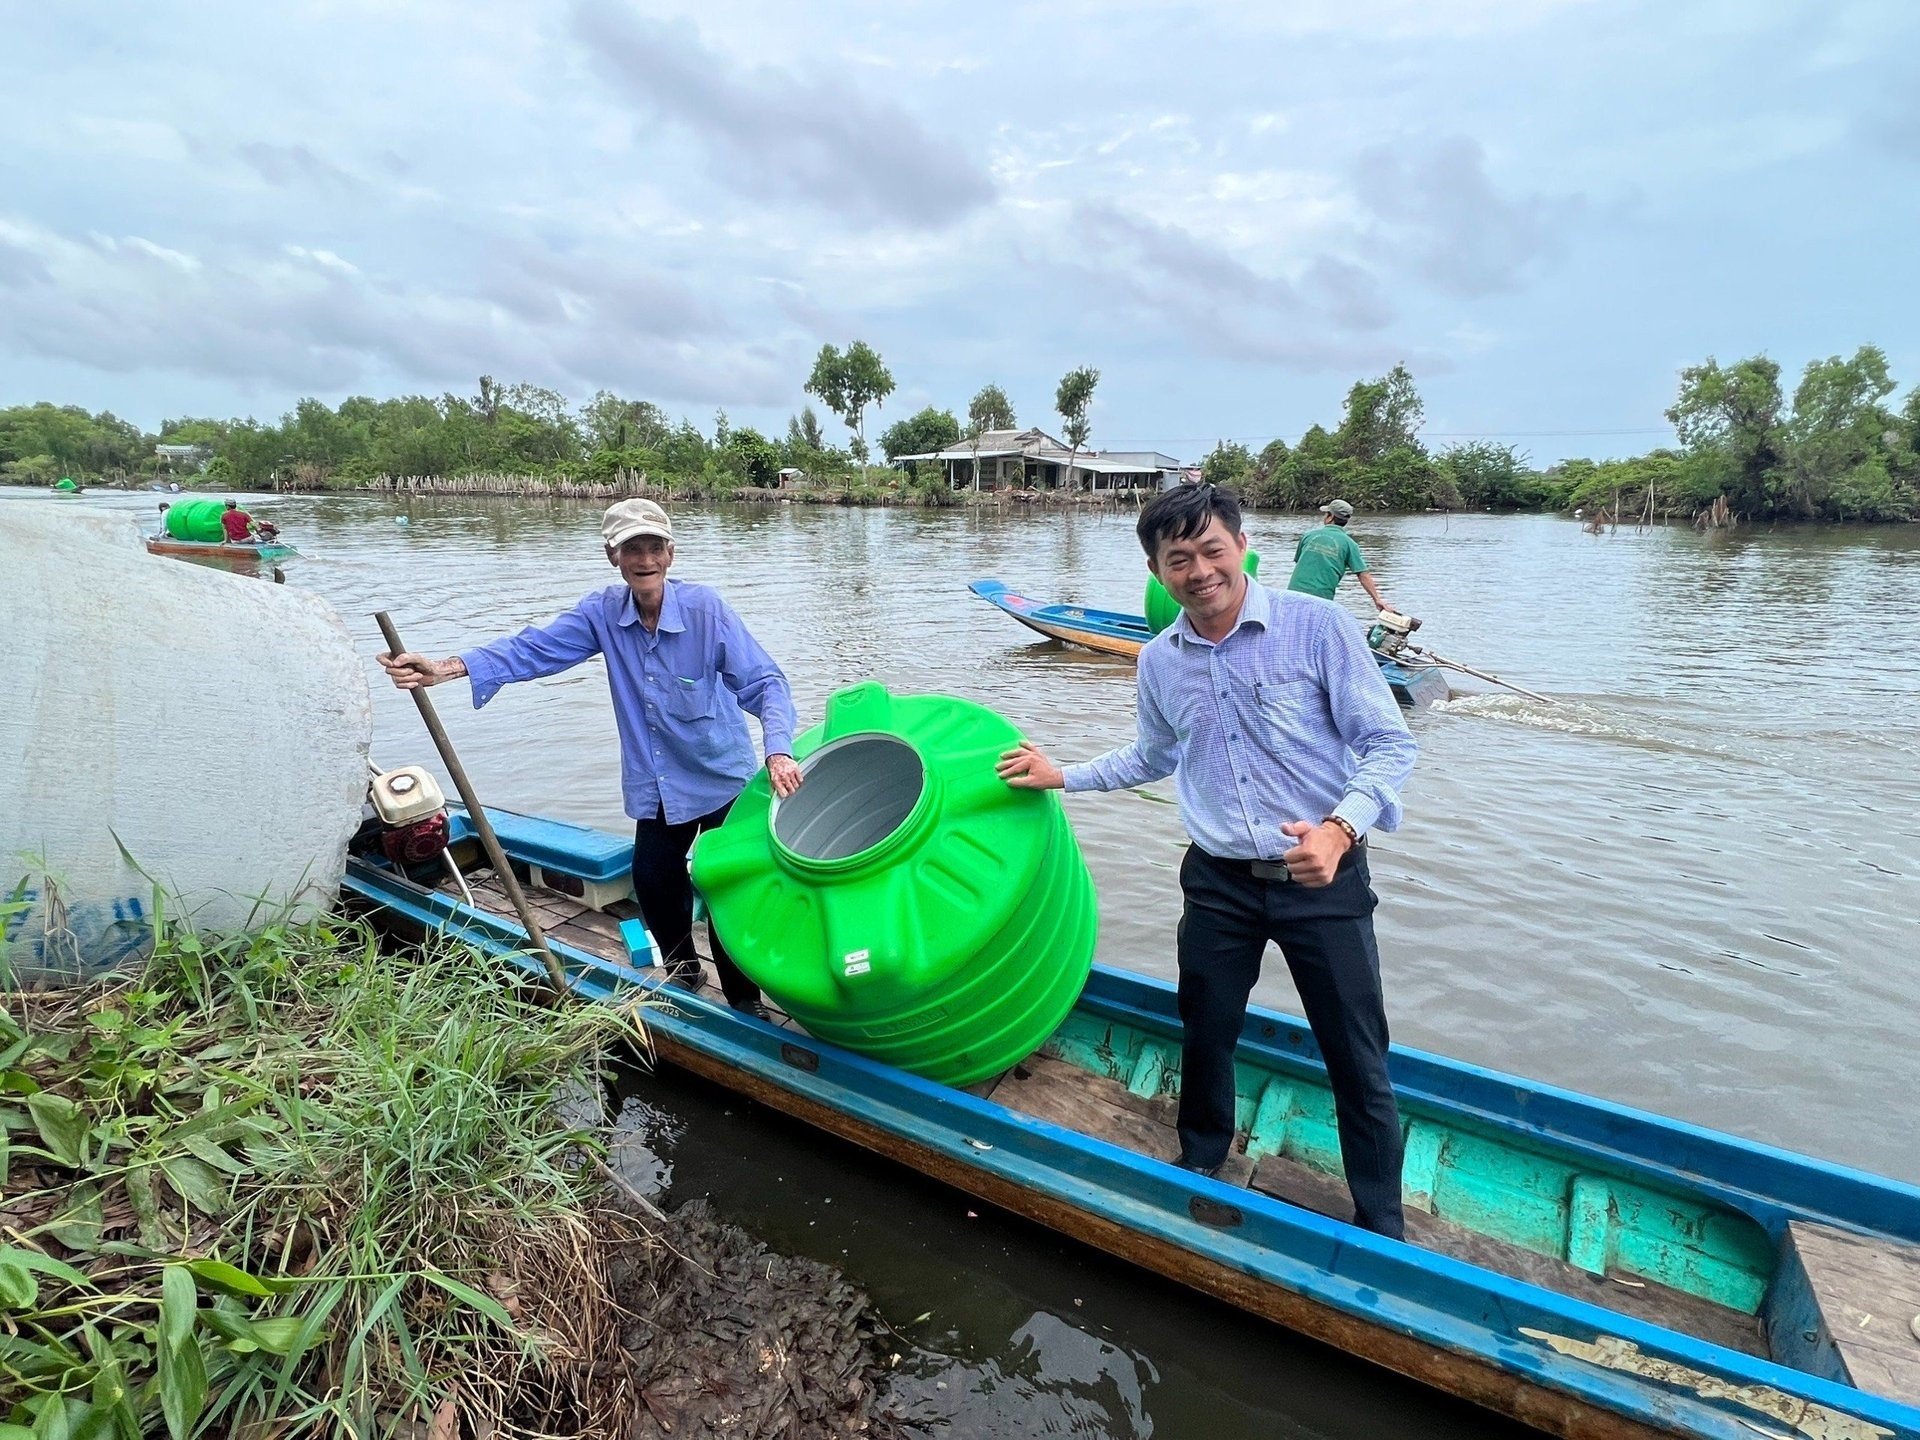 Representatives of Tan A Dai Thanh Group donated Plasman super tanks to people in the Mekong Delta.